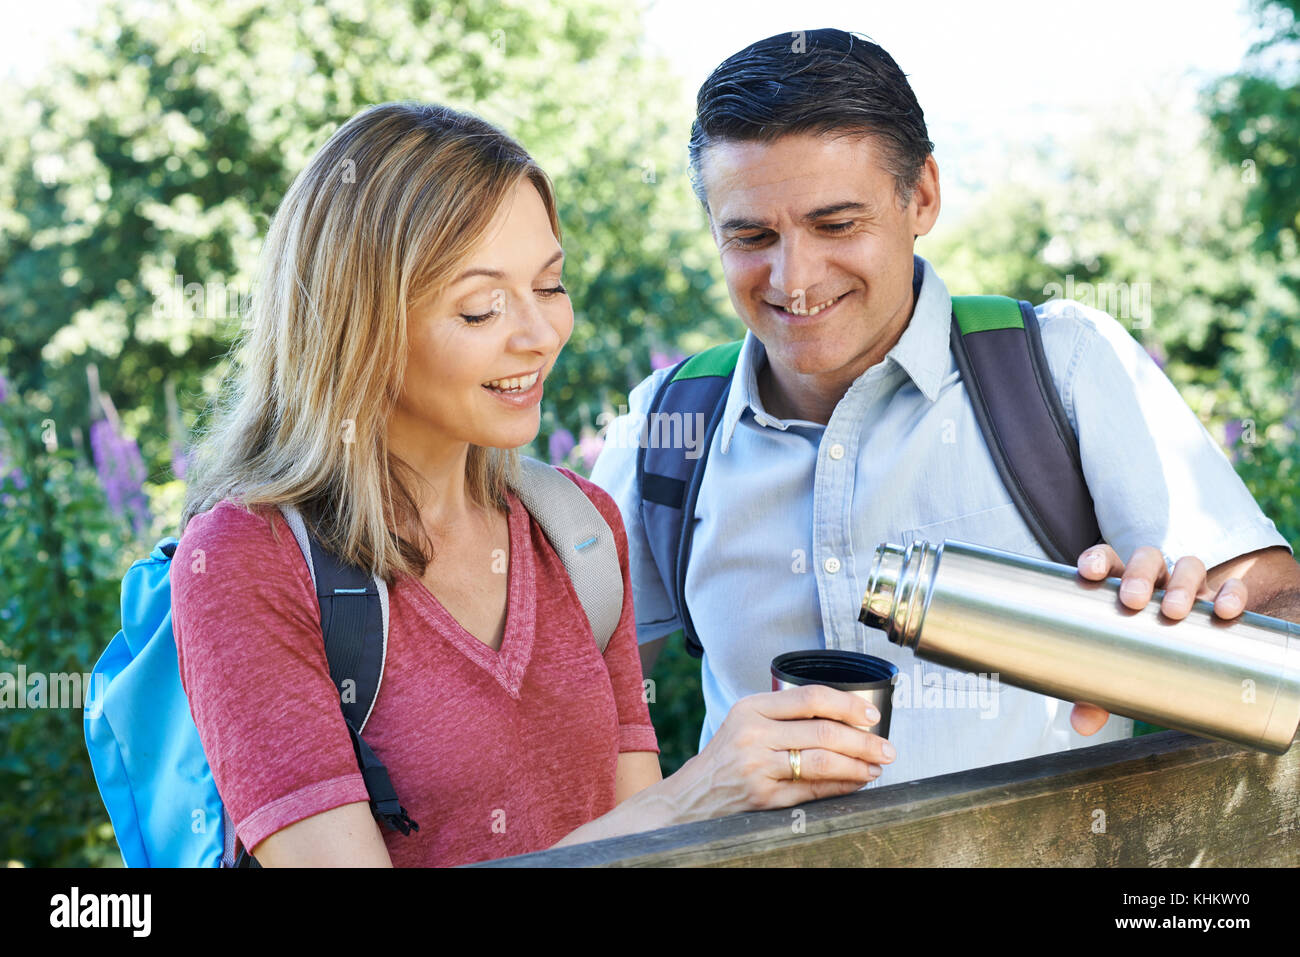 Mature Couple On Walk Drinking From Flask Stock Photo